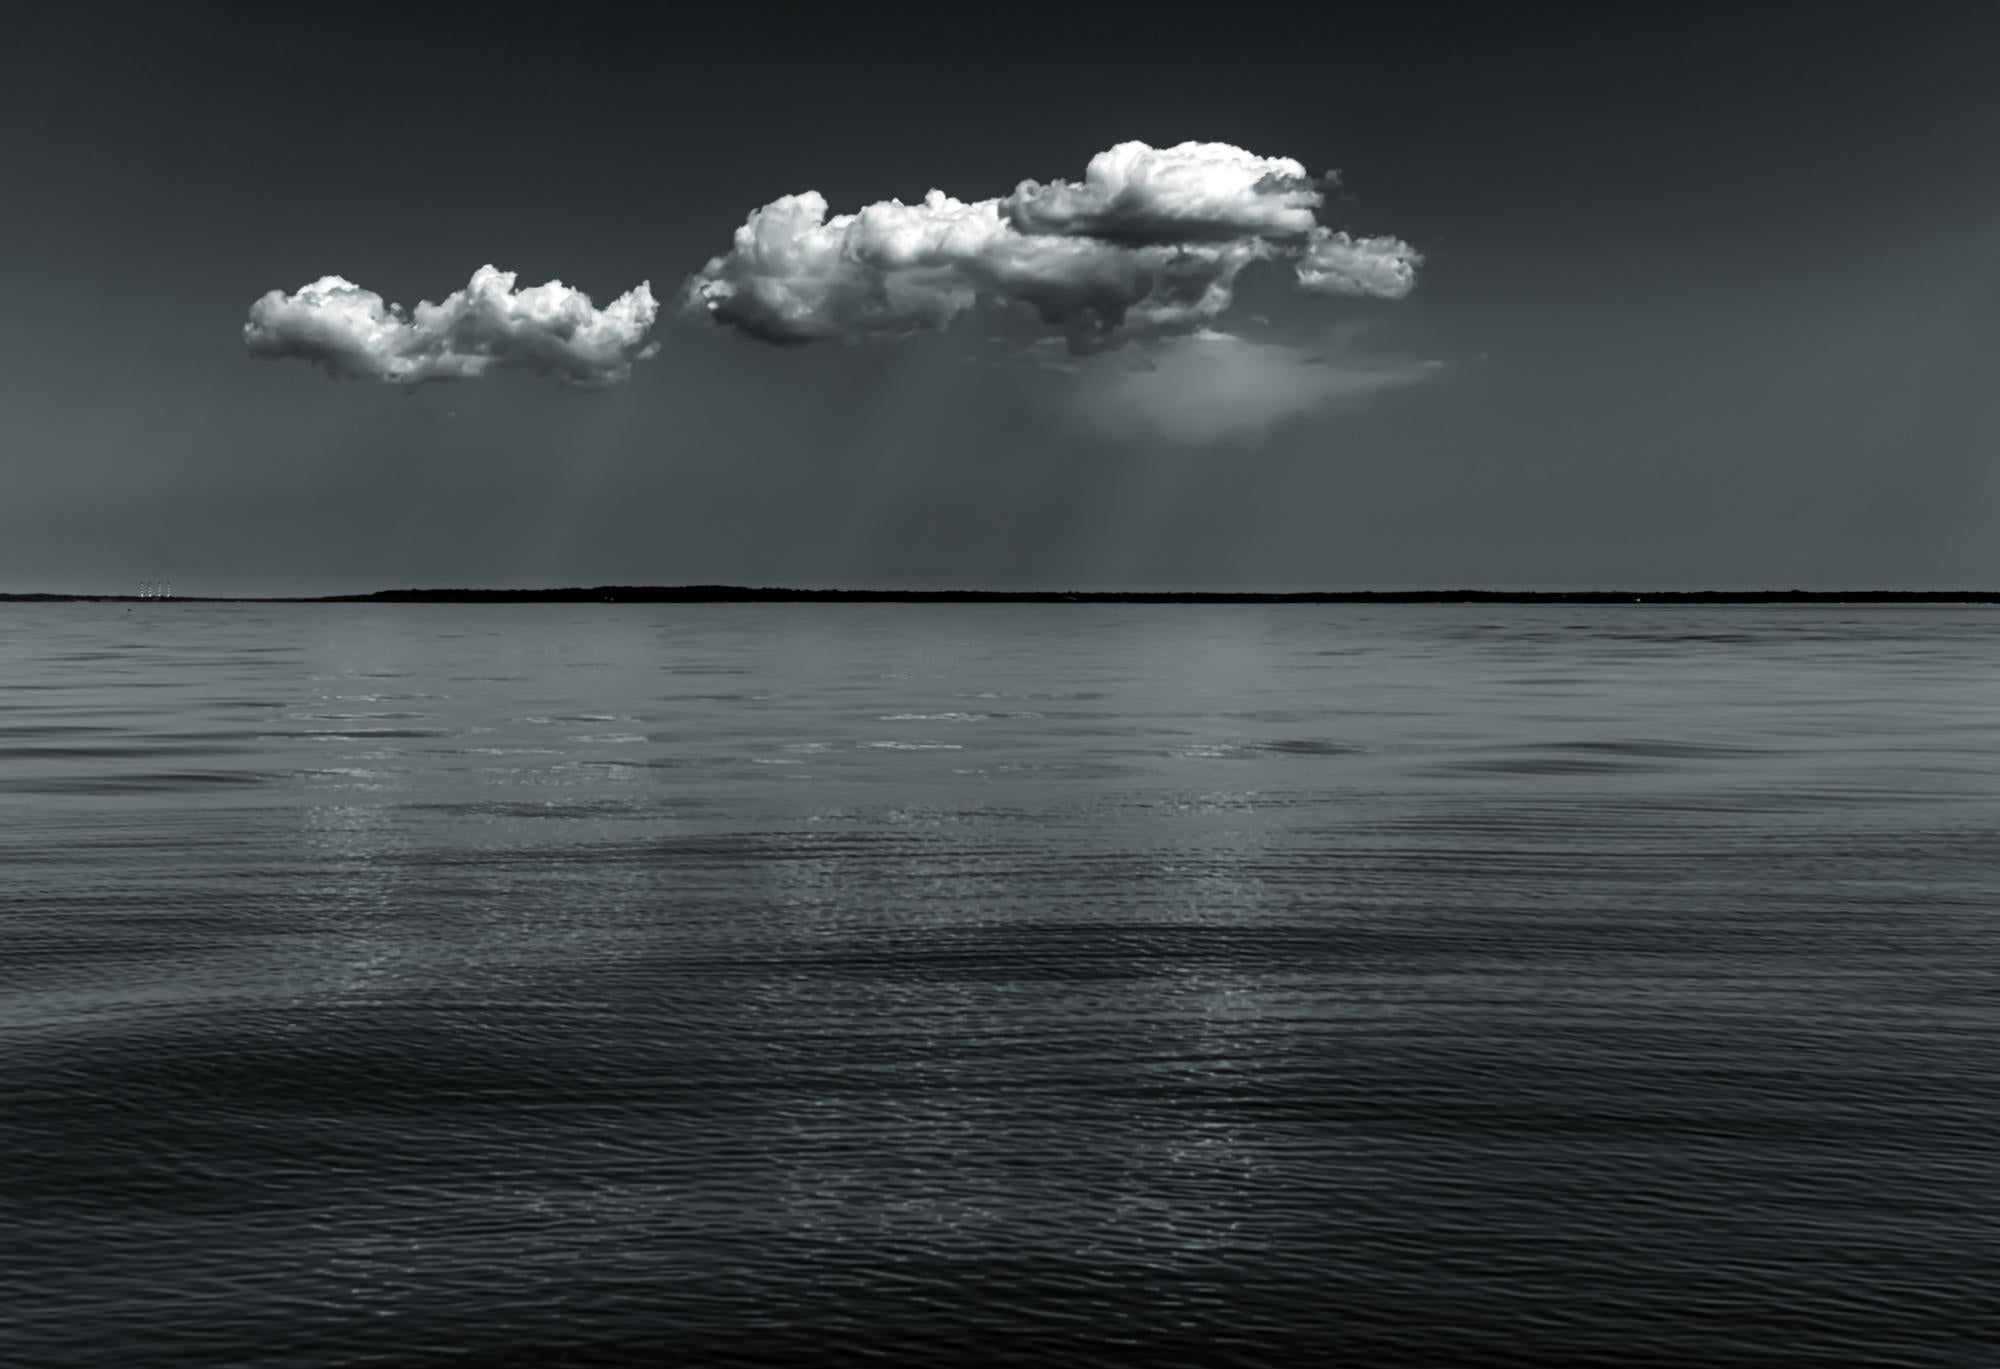 Howard Lewis Landscape Photograph - Limited Edition Black and White Photograph - " Sea Clouds #2 "